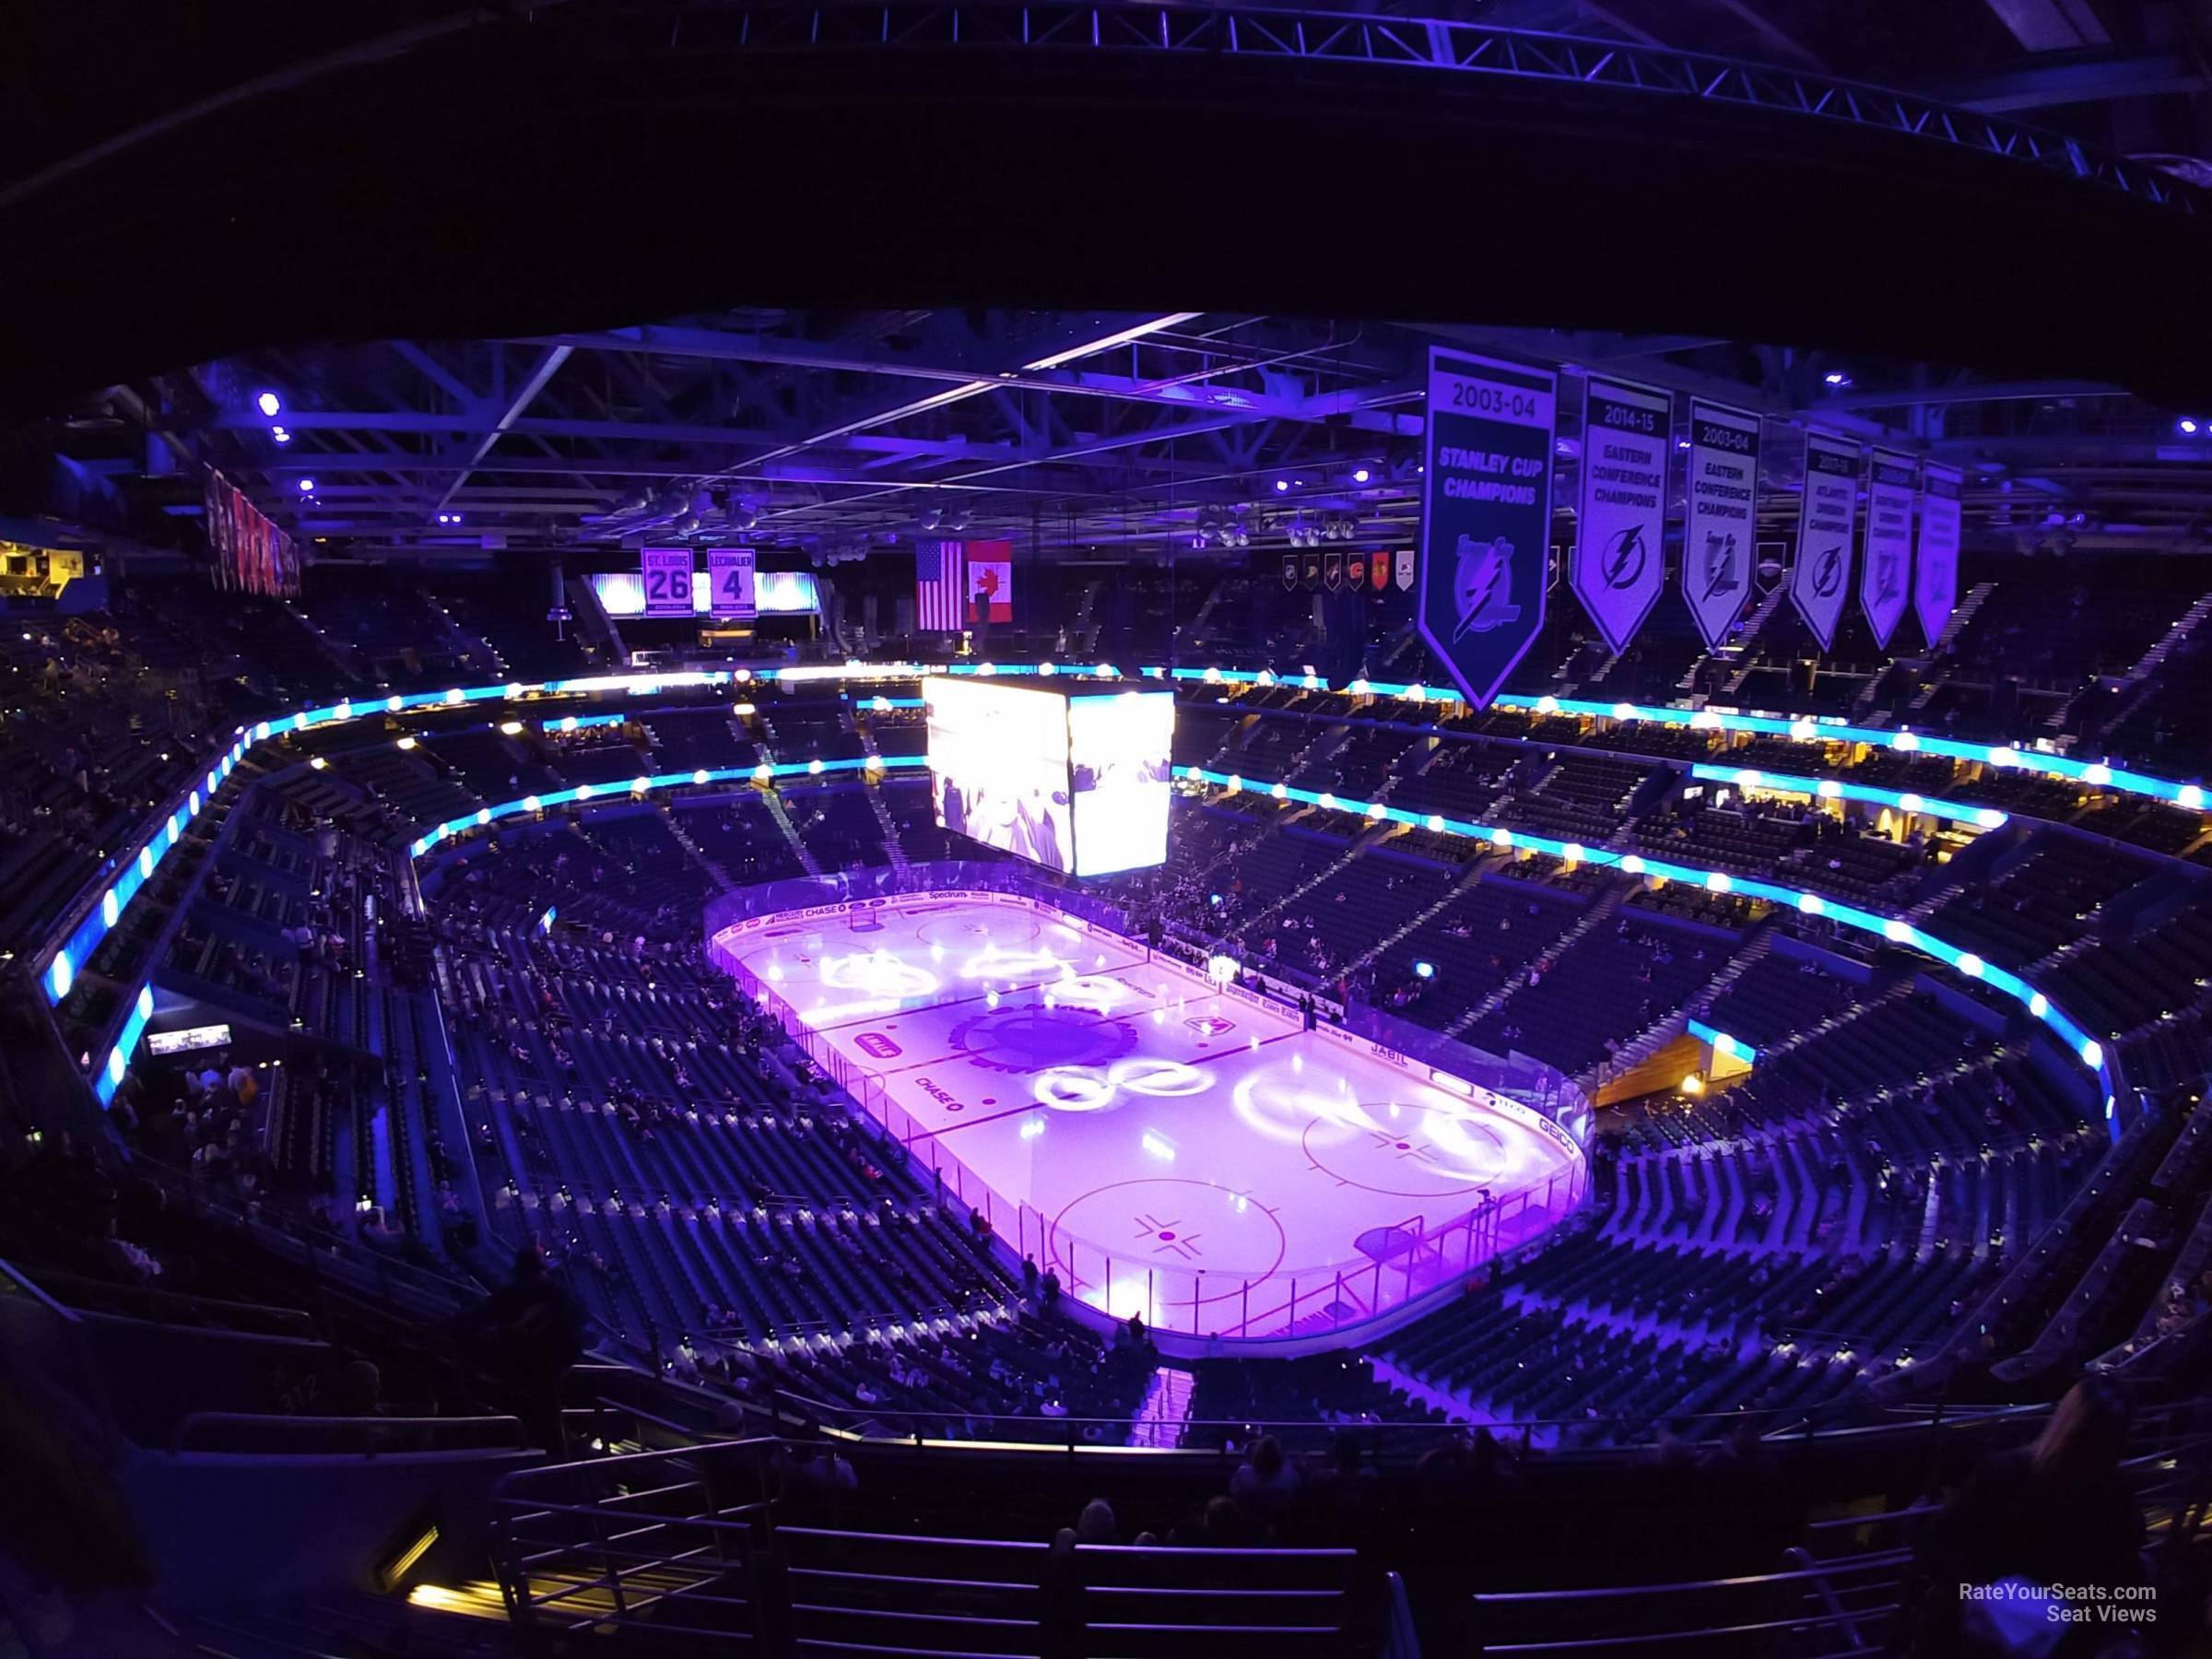 Section 317 Row K - very uncomfortble! - Review of Amalie Arena